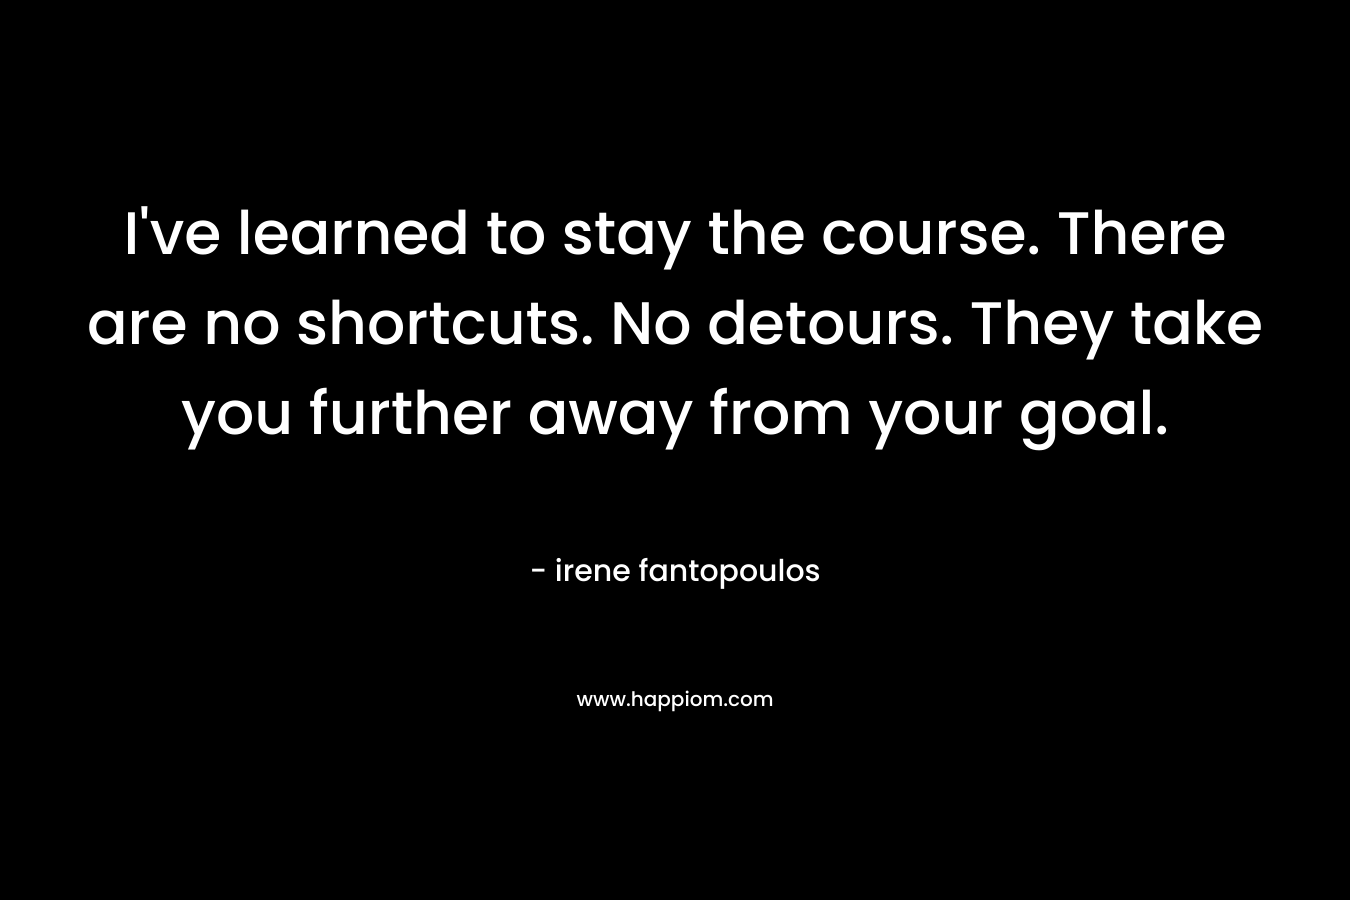 I’ve learned to stay the course. There are no shortcuts. No detours. They take you further away from your goal. – irene fantopoulos